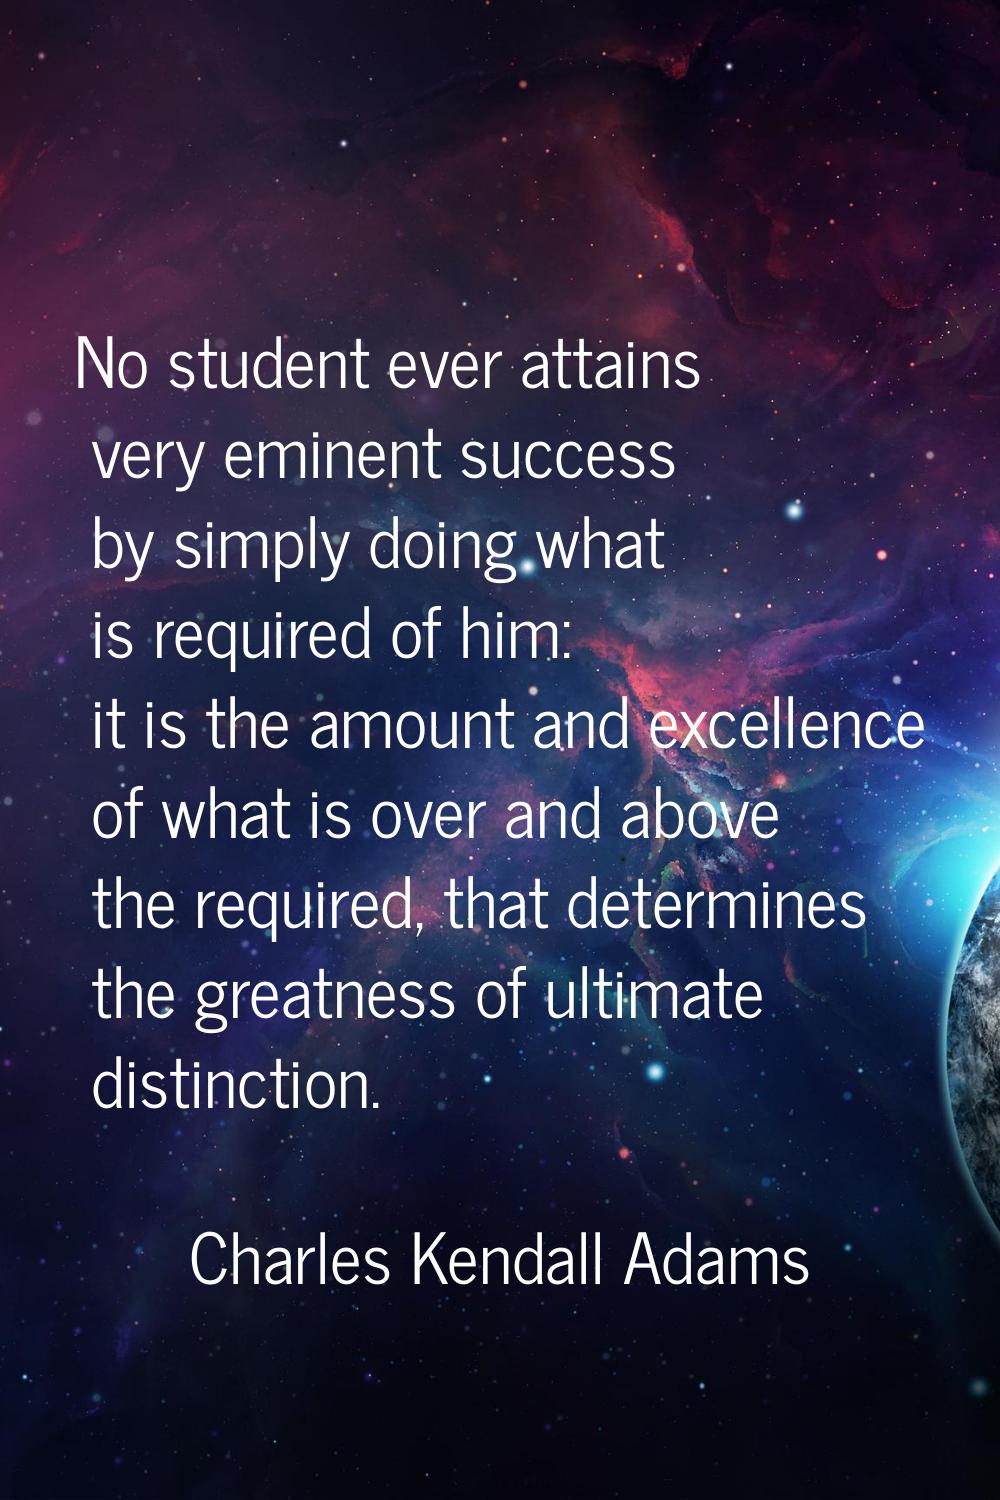 No student ever attains very eminent success by simply doing what is required of him: it is the amo